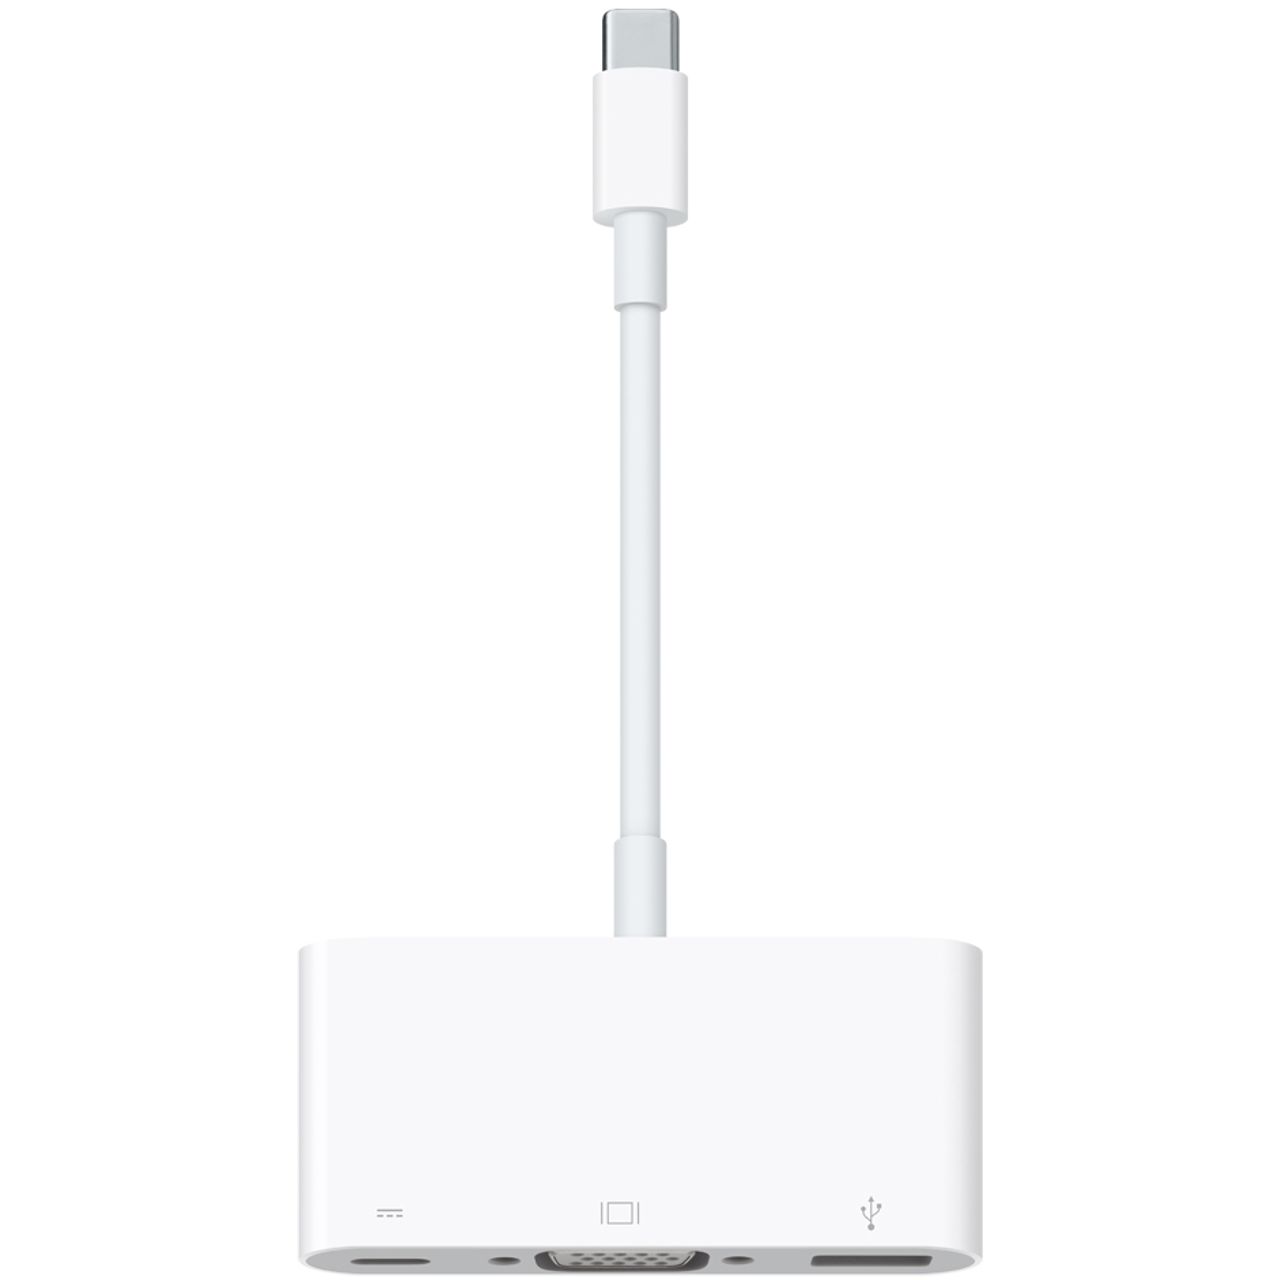 Apple USB-C to VGA Multiport Adapter Review